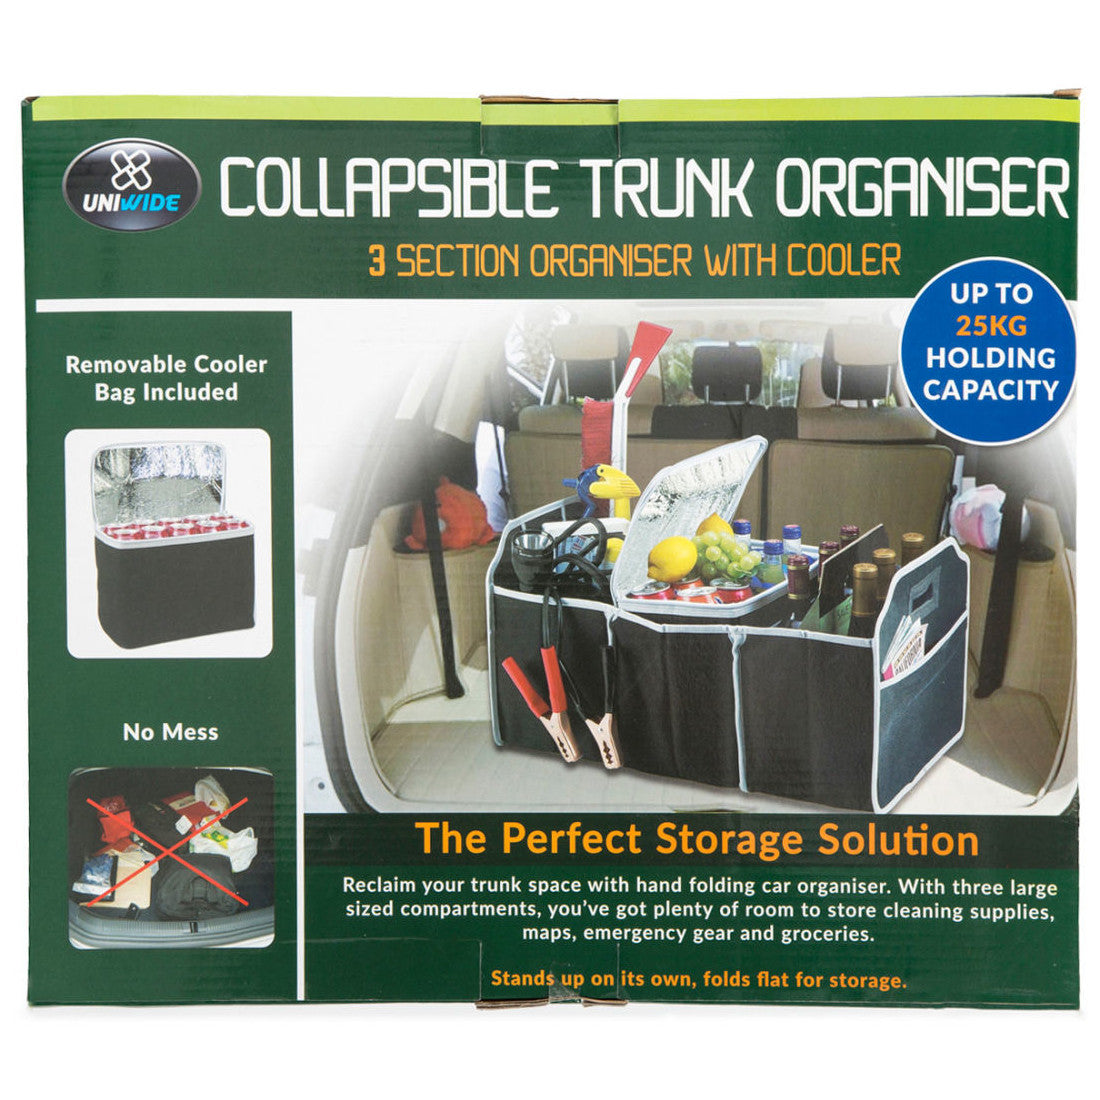 Collapsible Trunk Organiser 3 Section Organiser With Cooler